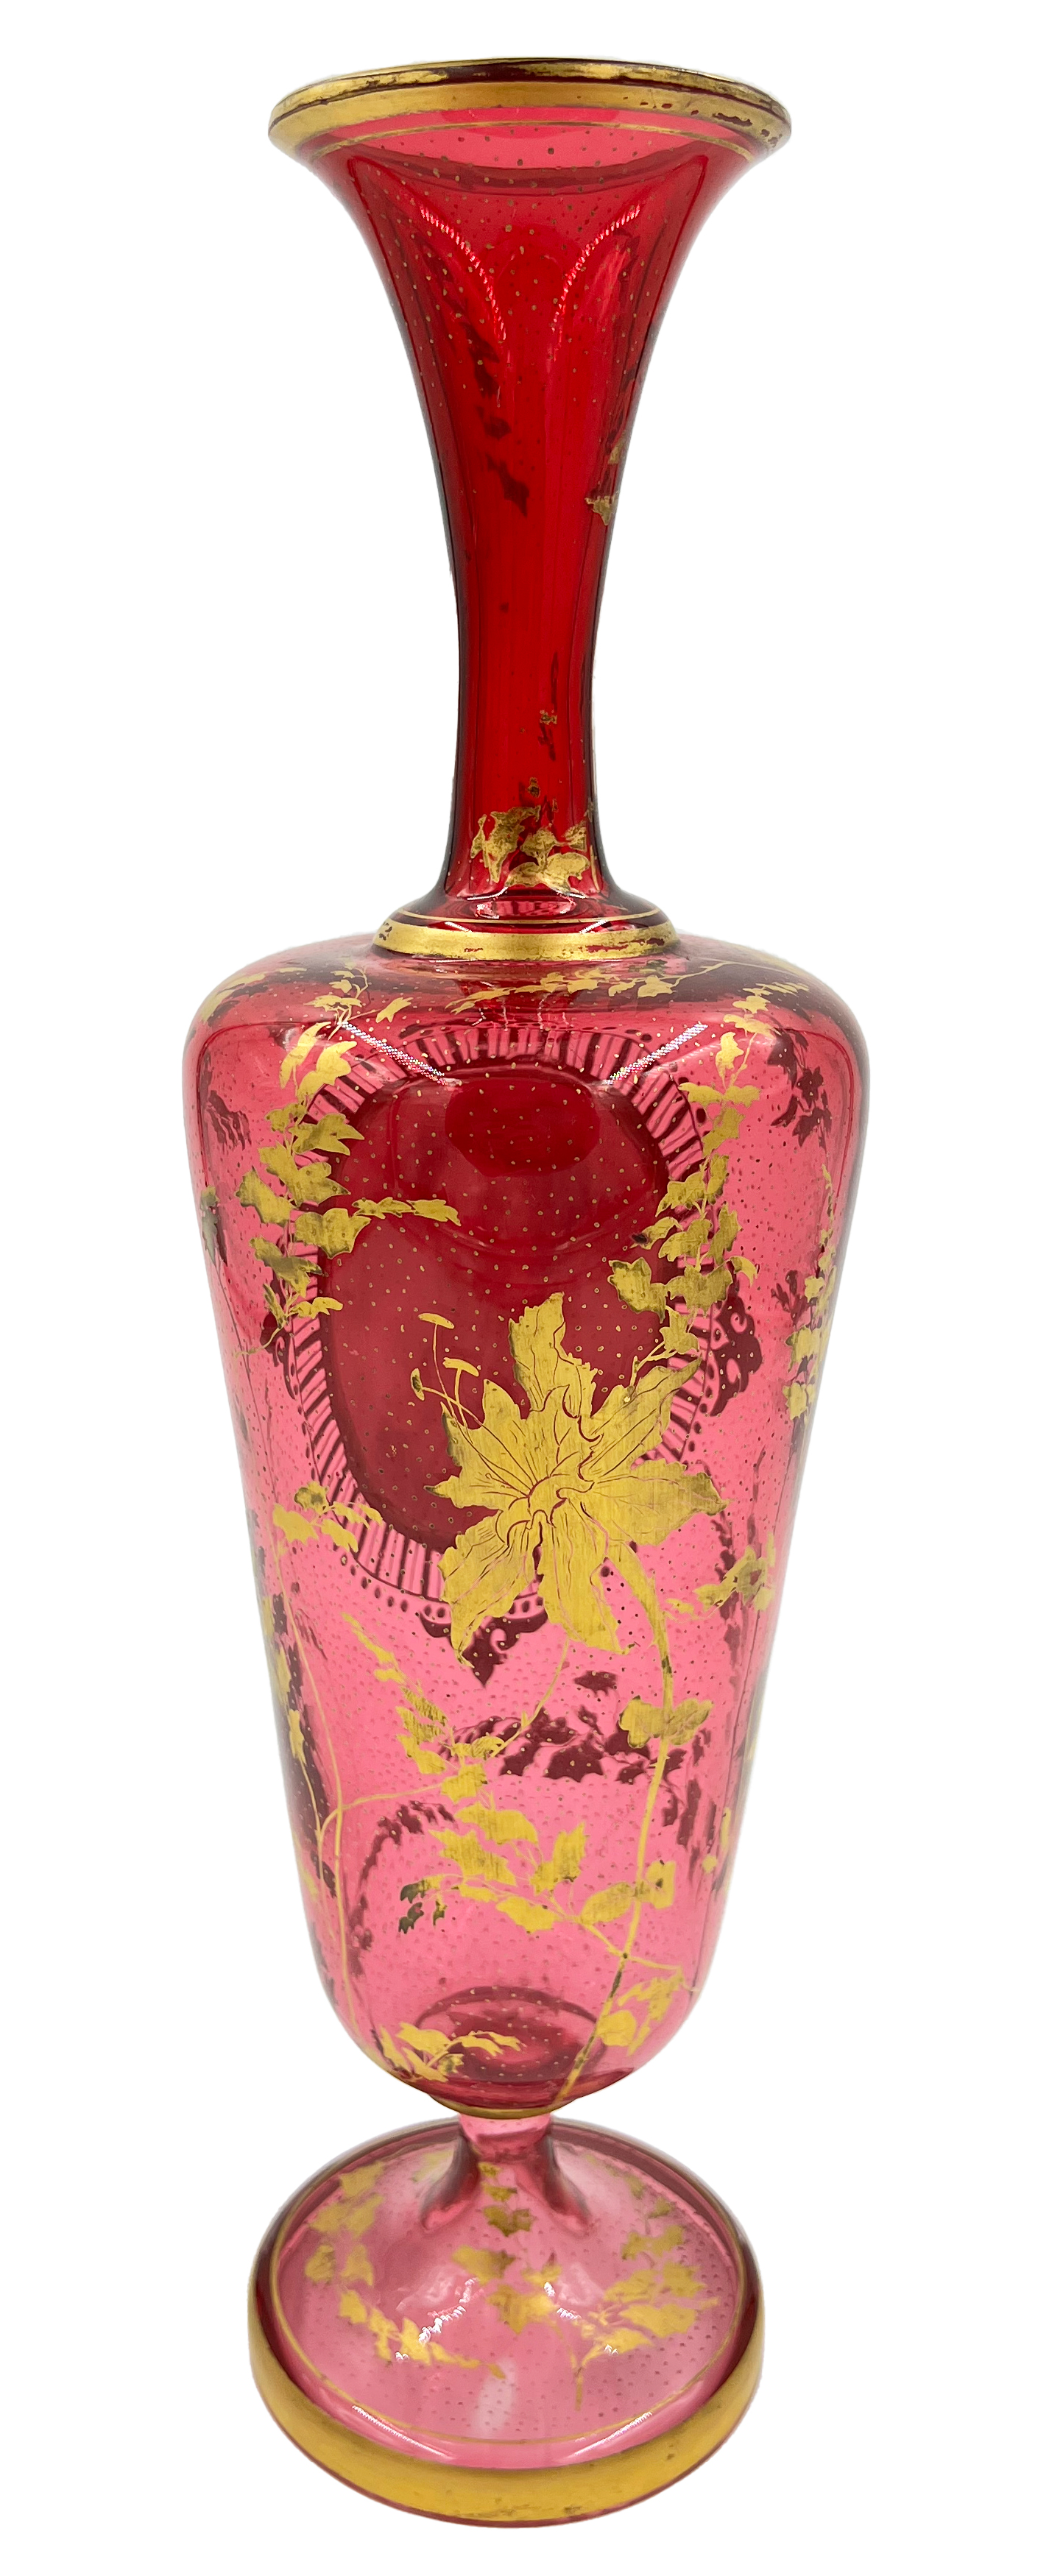 LARGE 19TH CENTURY BOHEMIAN GLASS VASE WITH GOLD GILDING AND HAND PAINTED PORCELAIN PLAQUE - Image 2 of 3